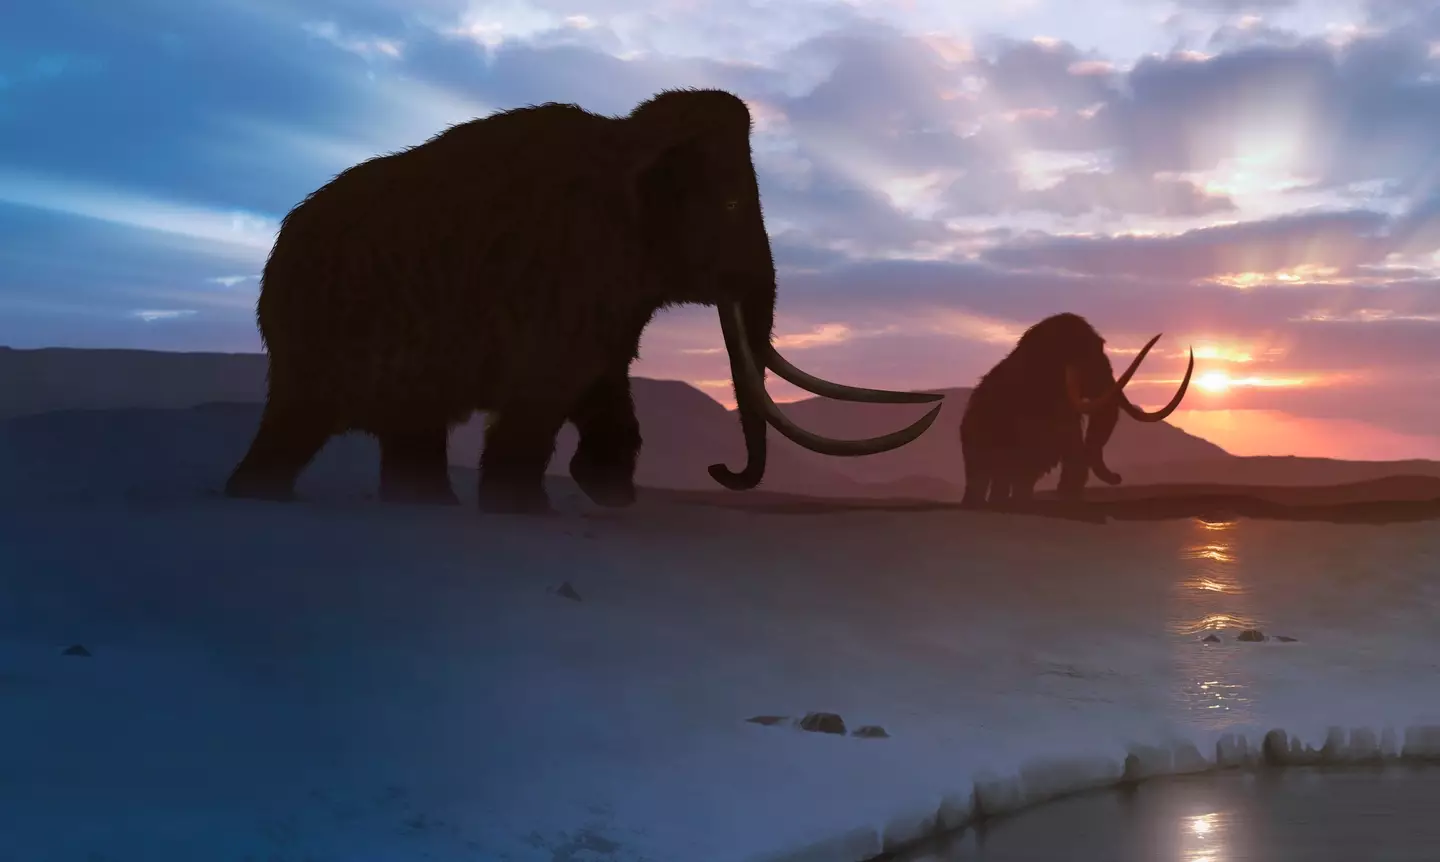 Stem cells could be the answer to bringing the mammoths back.